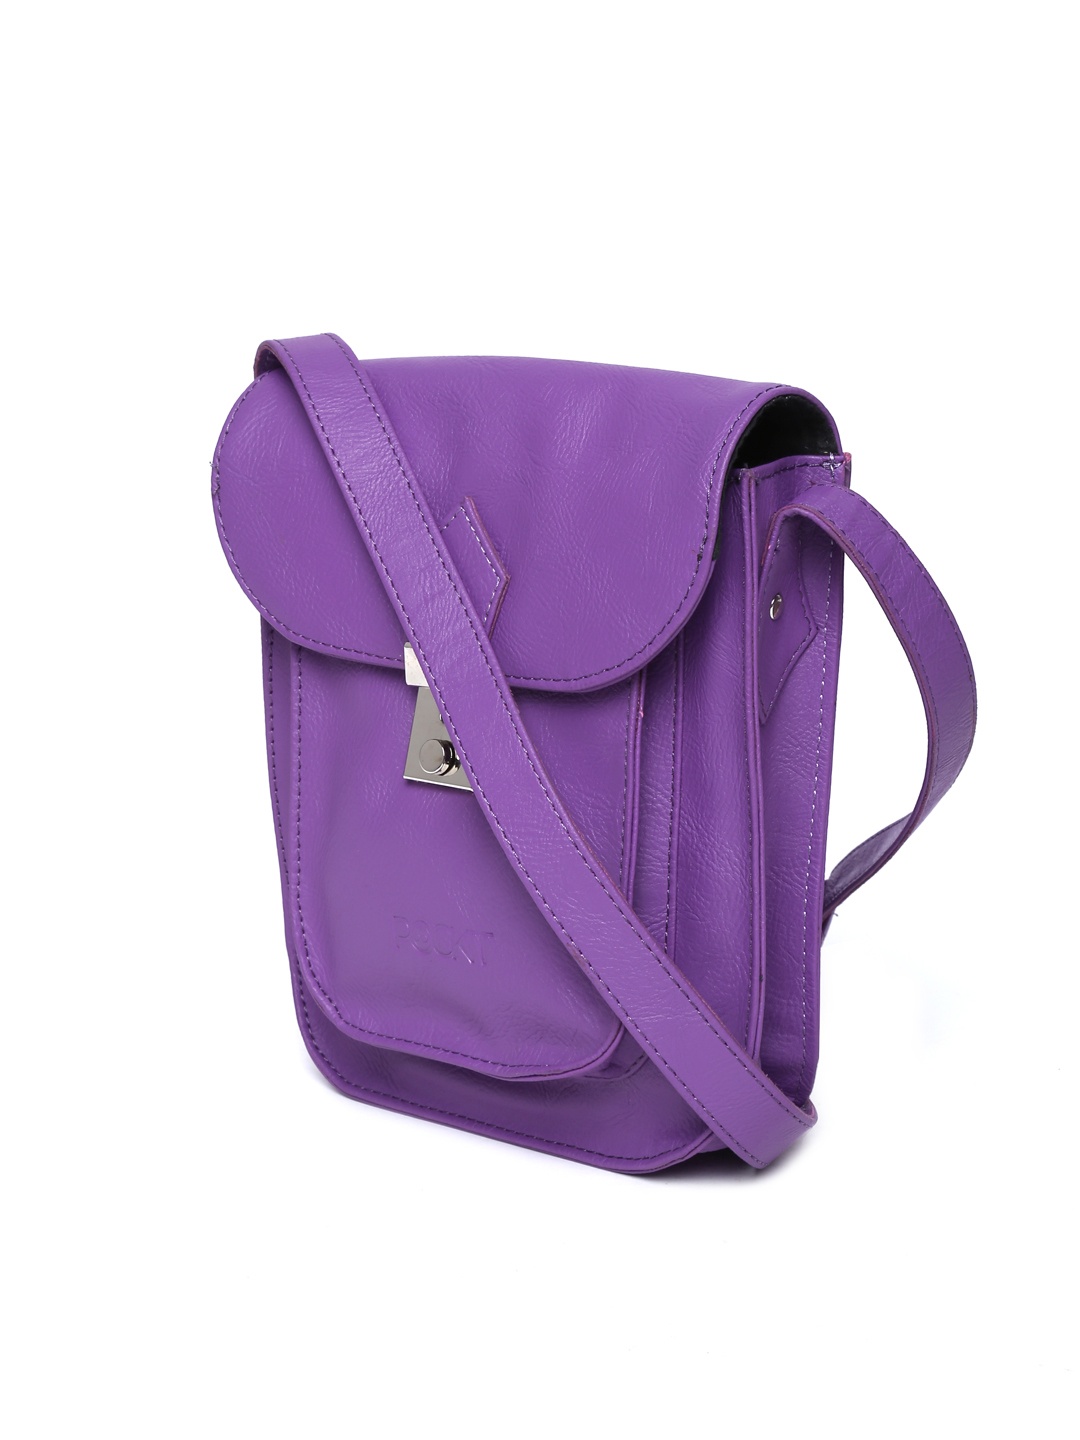 Myntra POCKIT Purple Sling Bag 844773 | Buy Myntra at best price online. All myntra products ...